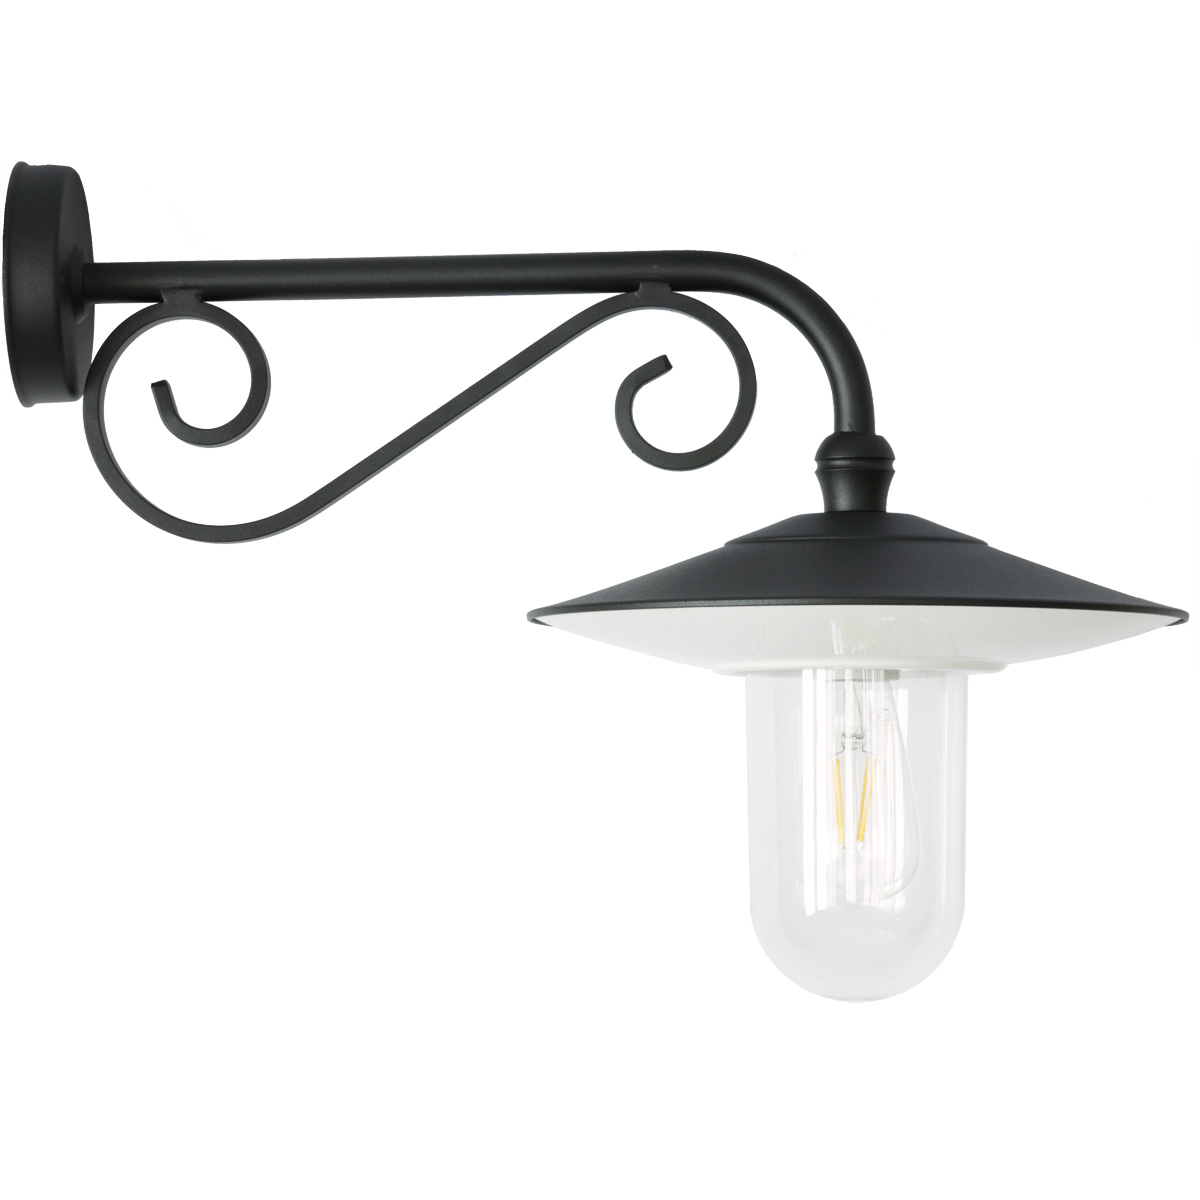 Outdoor Wall Light with Decorative Bracket